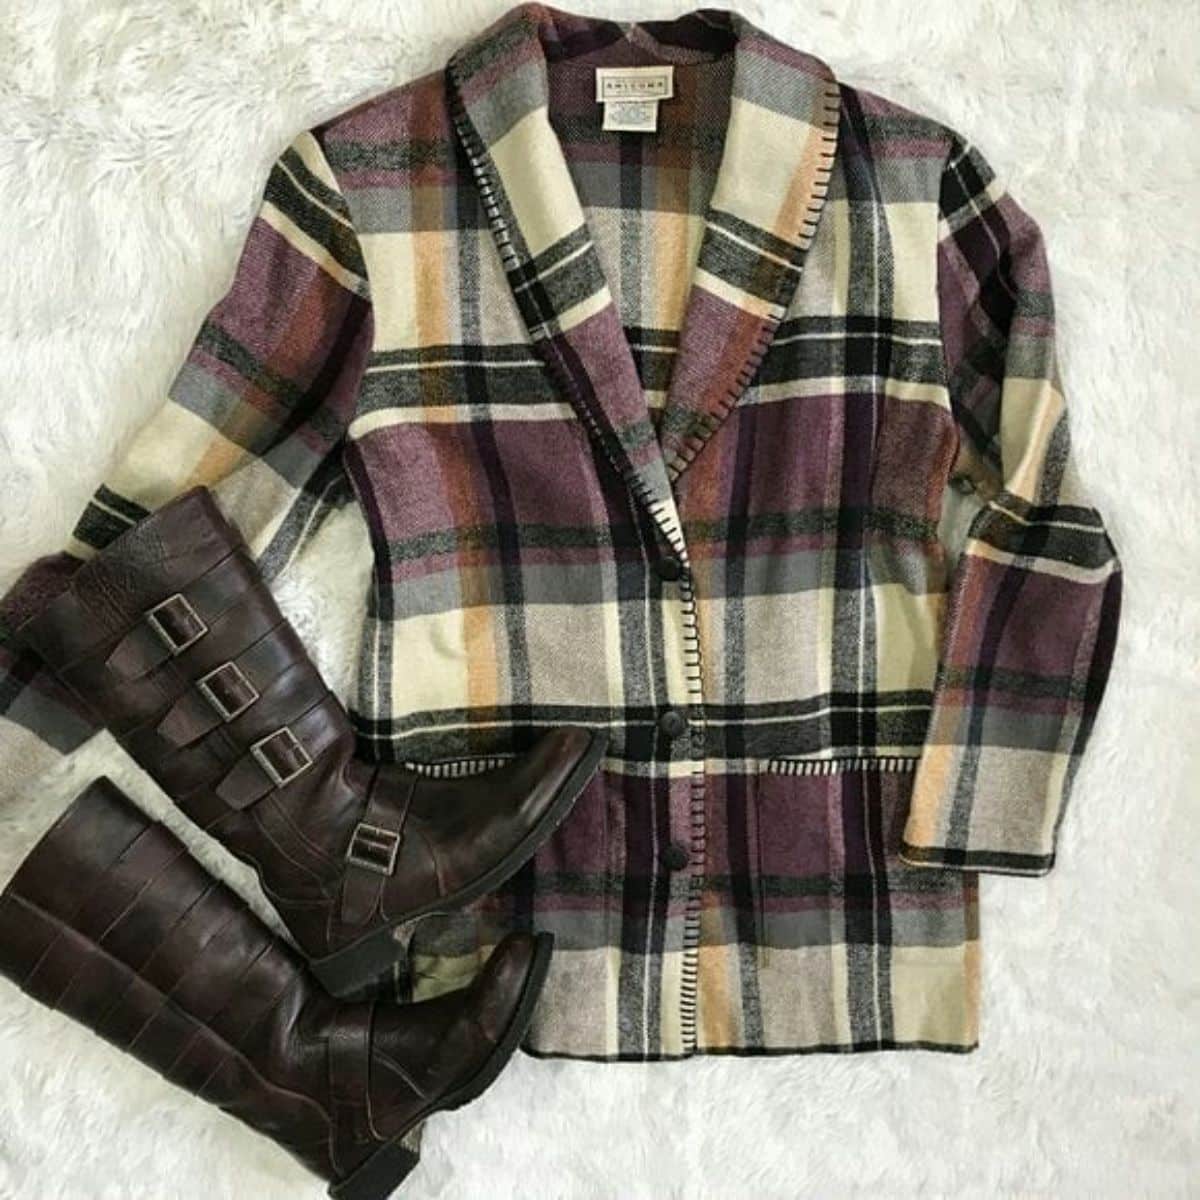 A plaid jacked with leather boots.